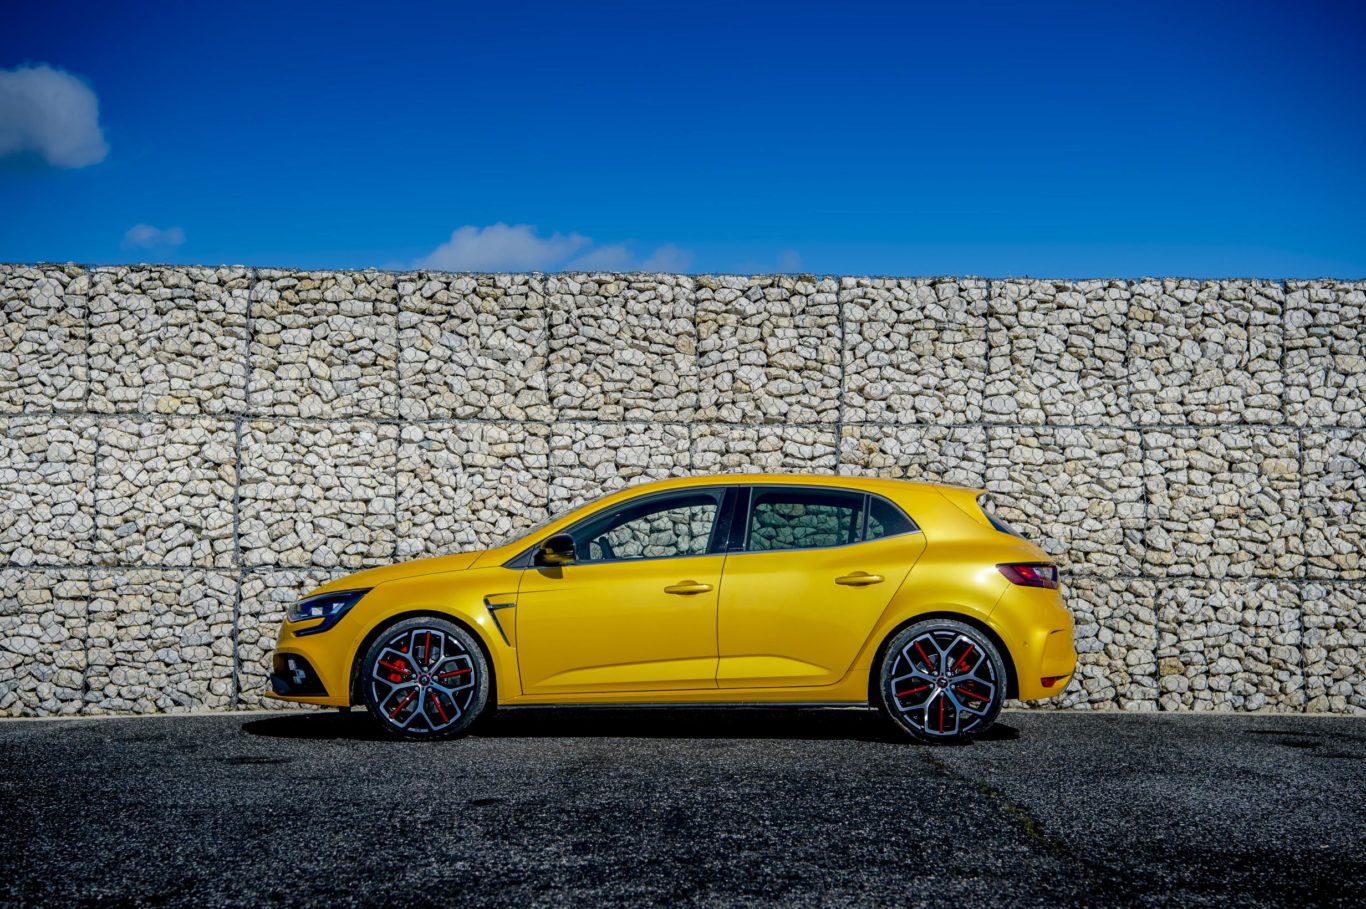 First deliveries of the Megane R.S. Trophy are expected to commence in February 2019